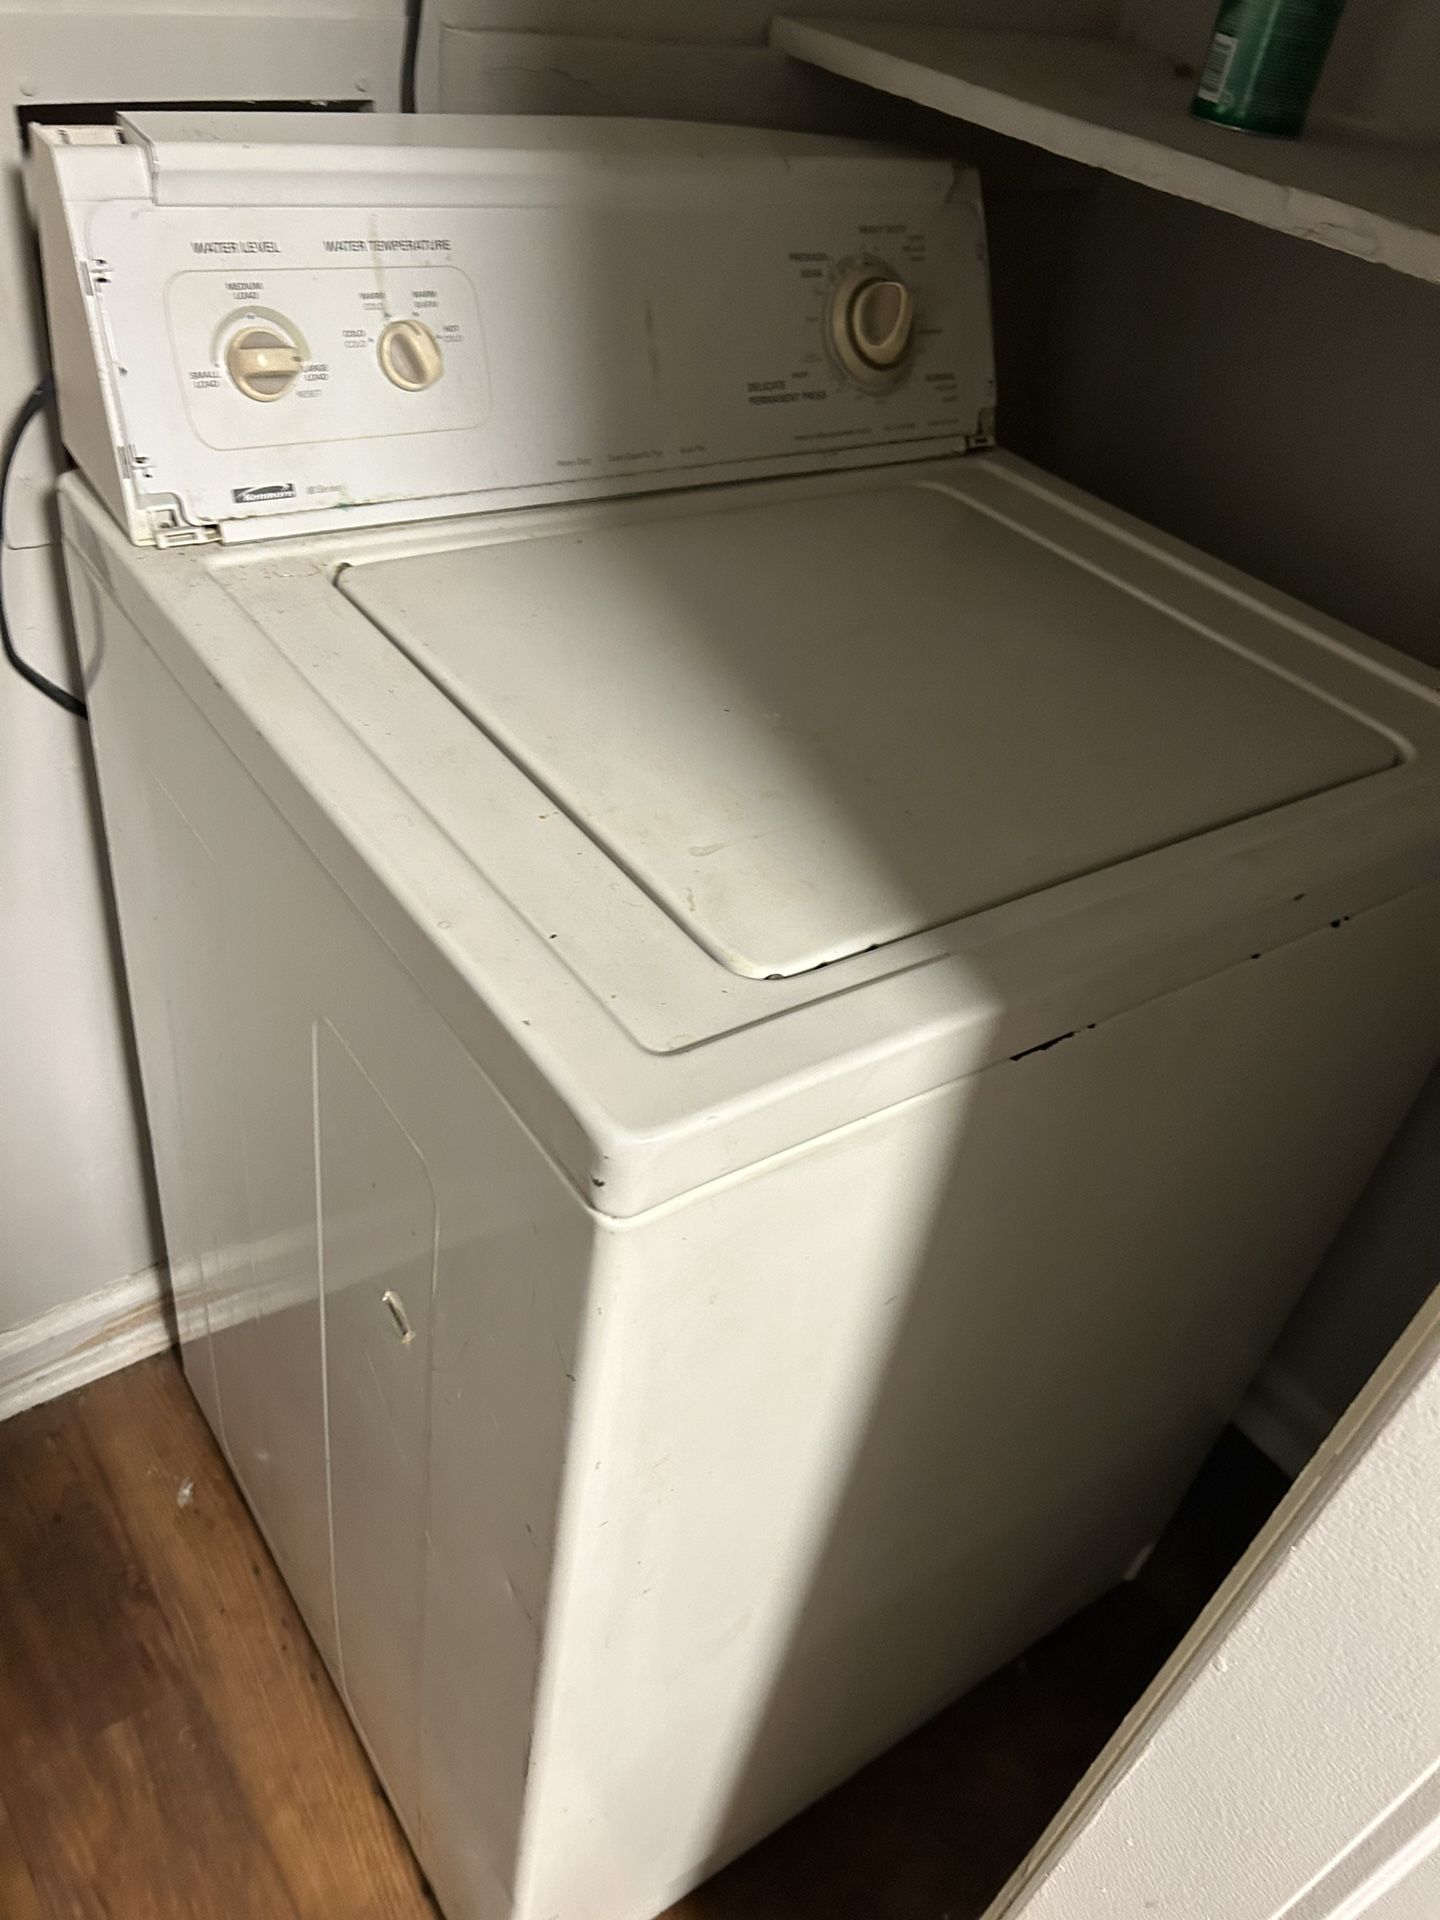 Washer And Dryer Kenmore